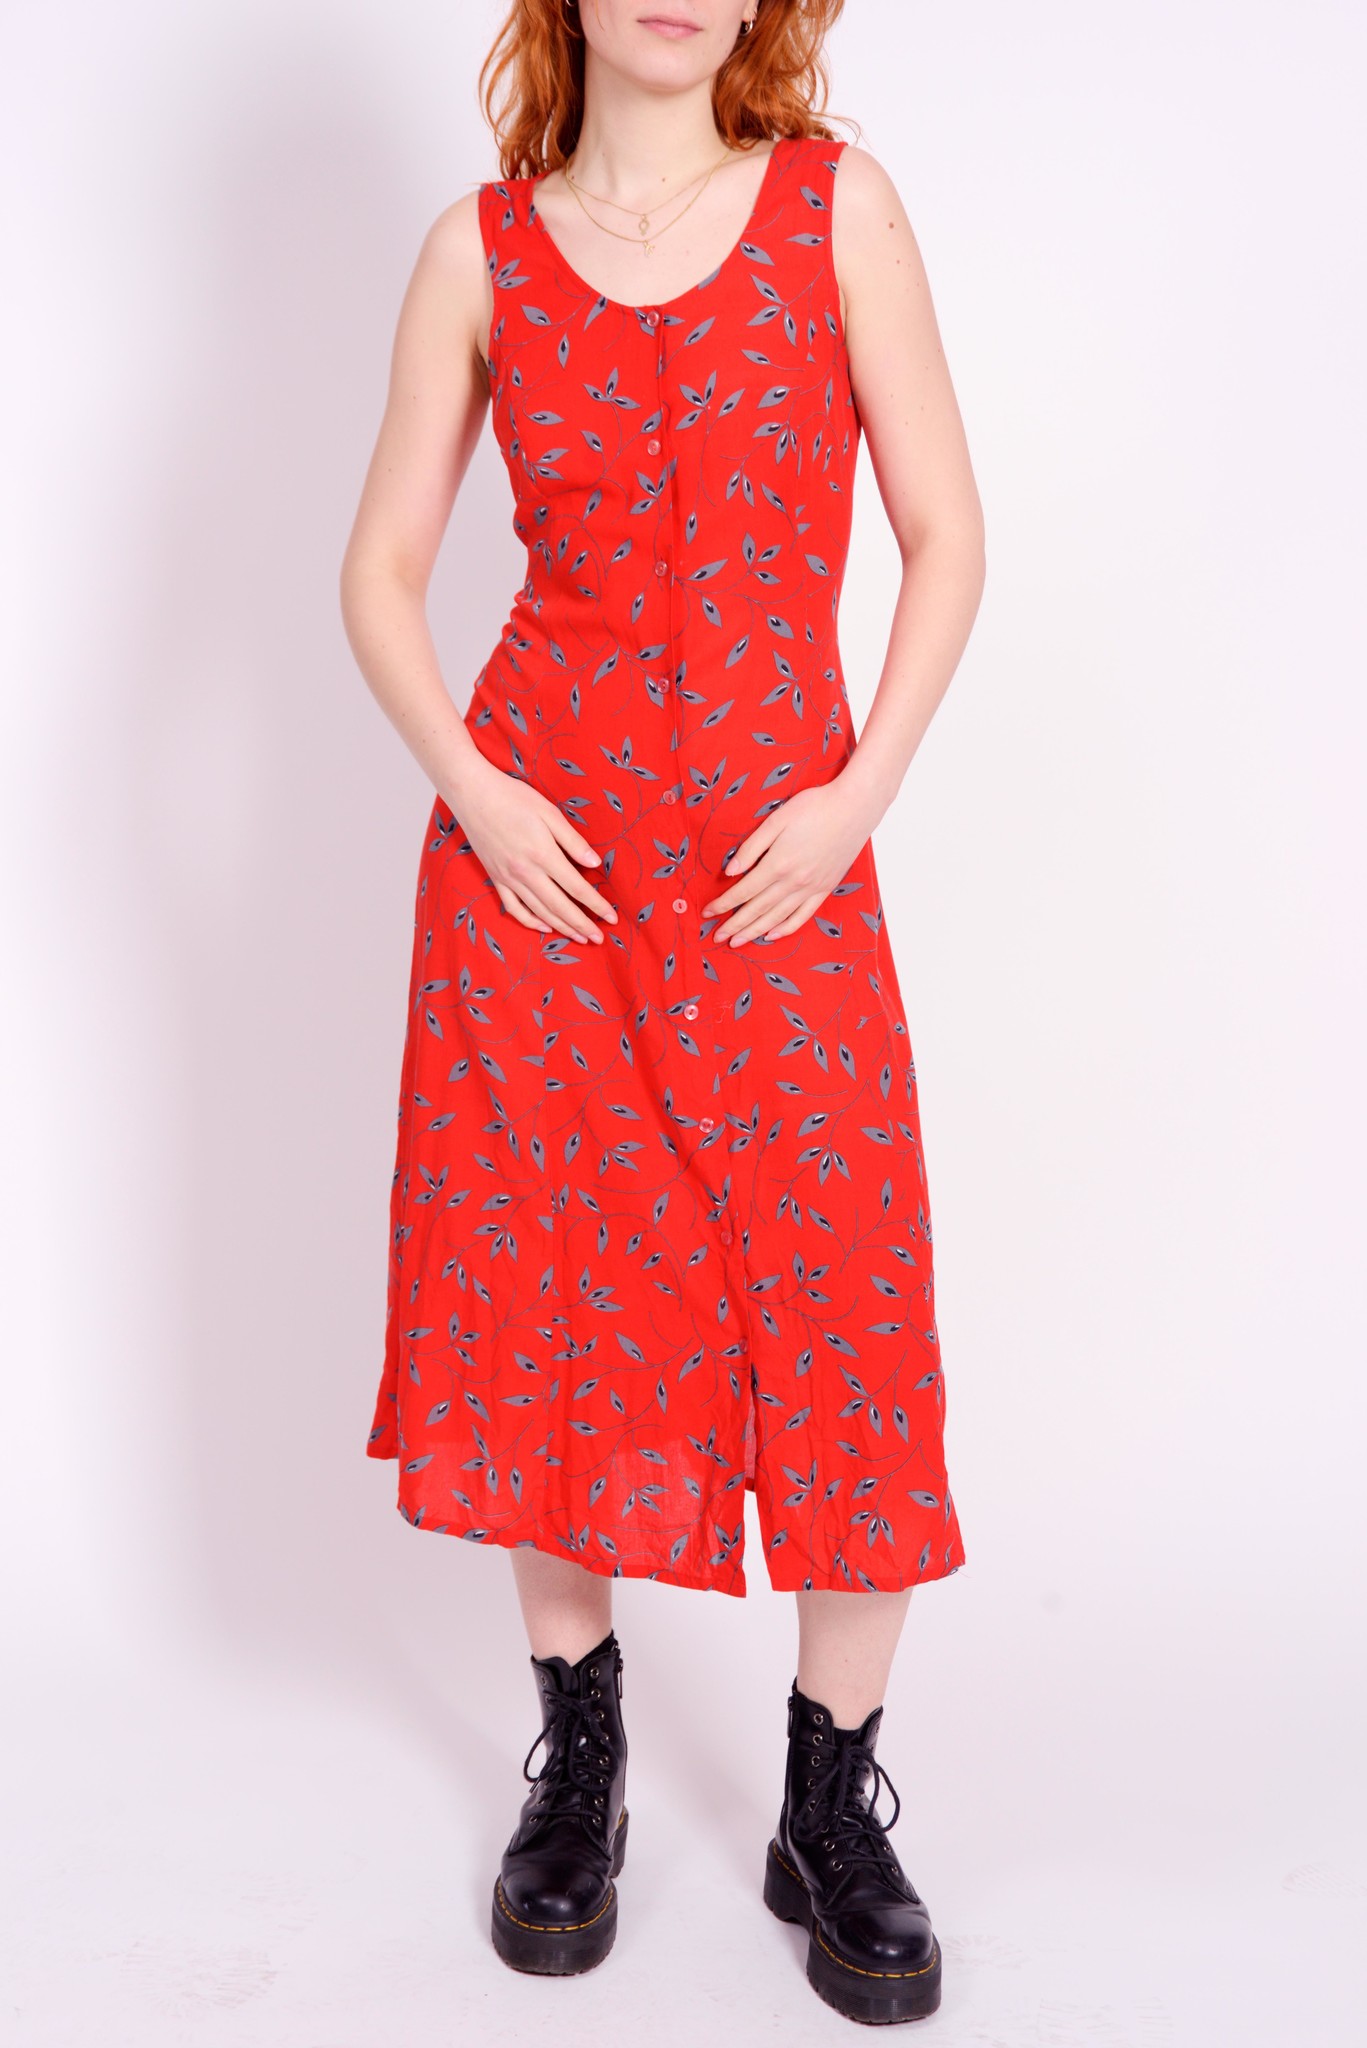 Red 90s floral dress